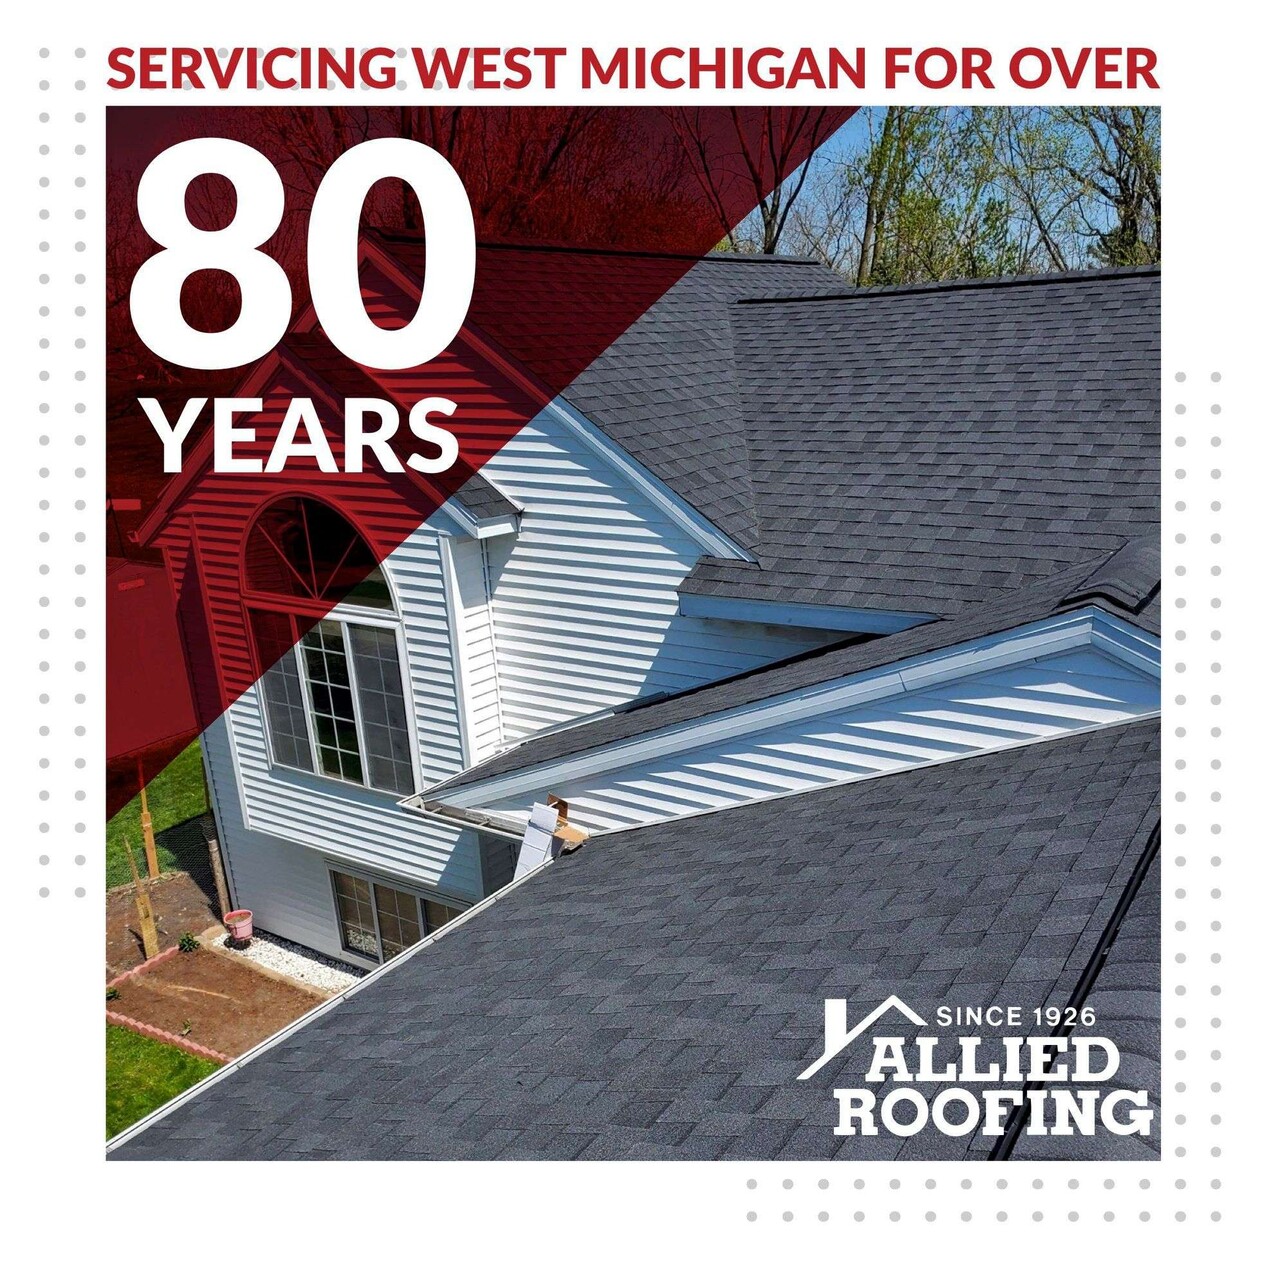 Allied Roofing